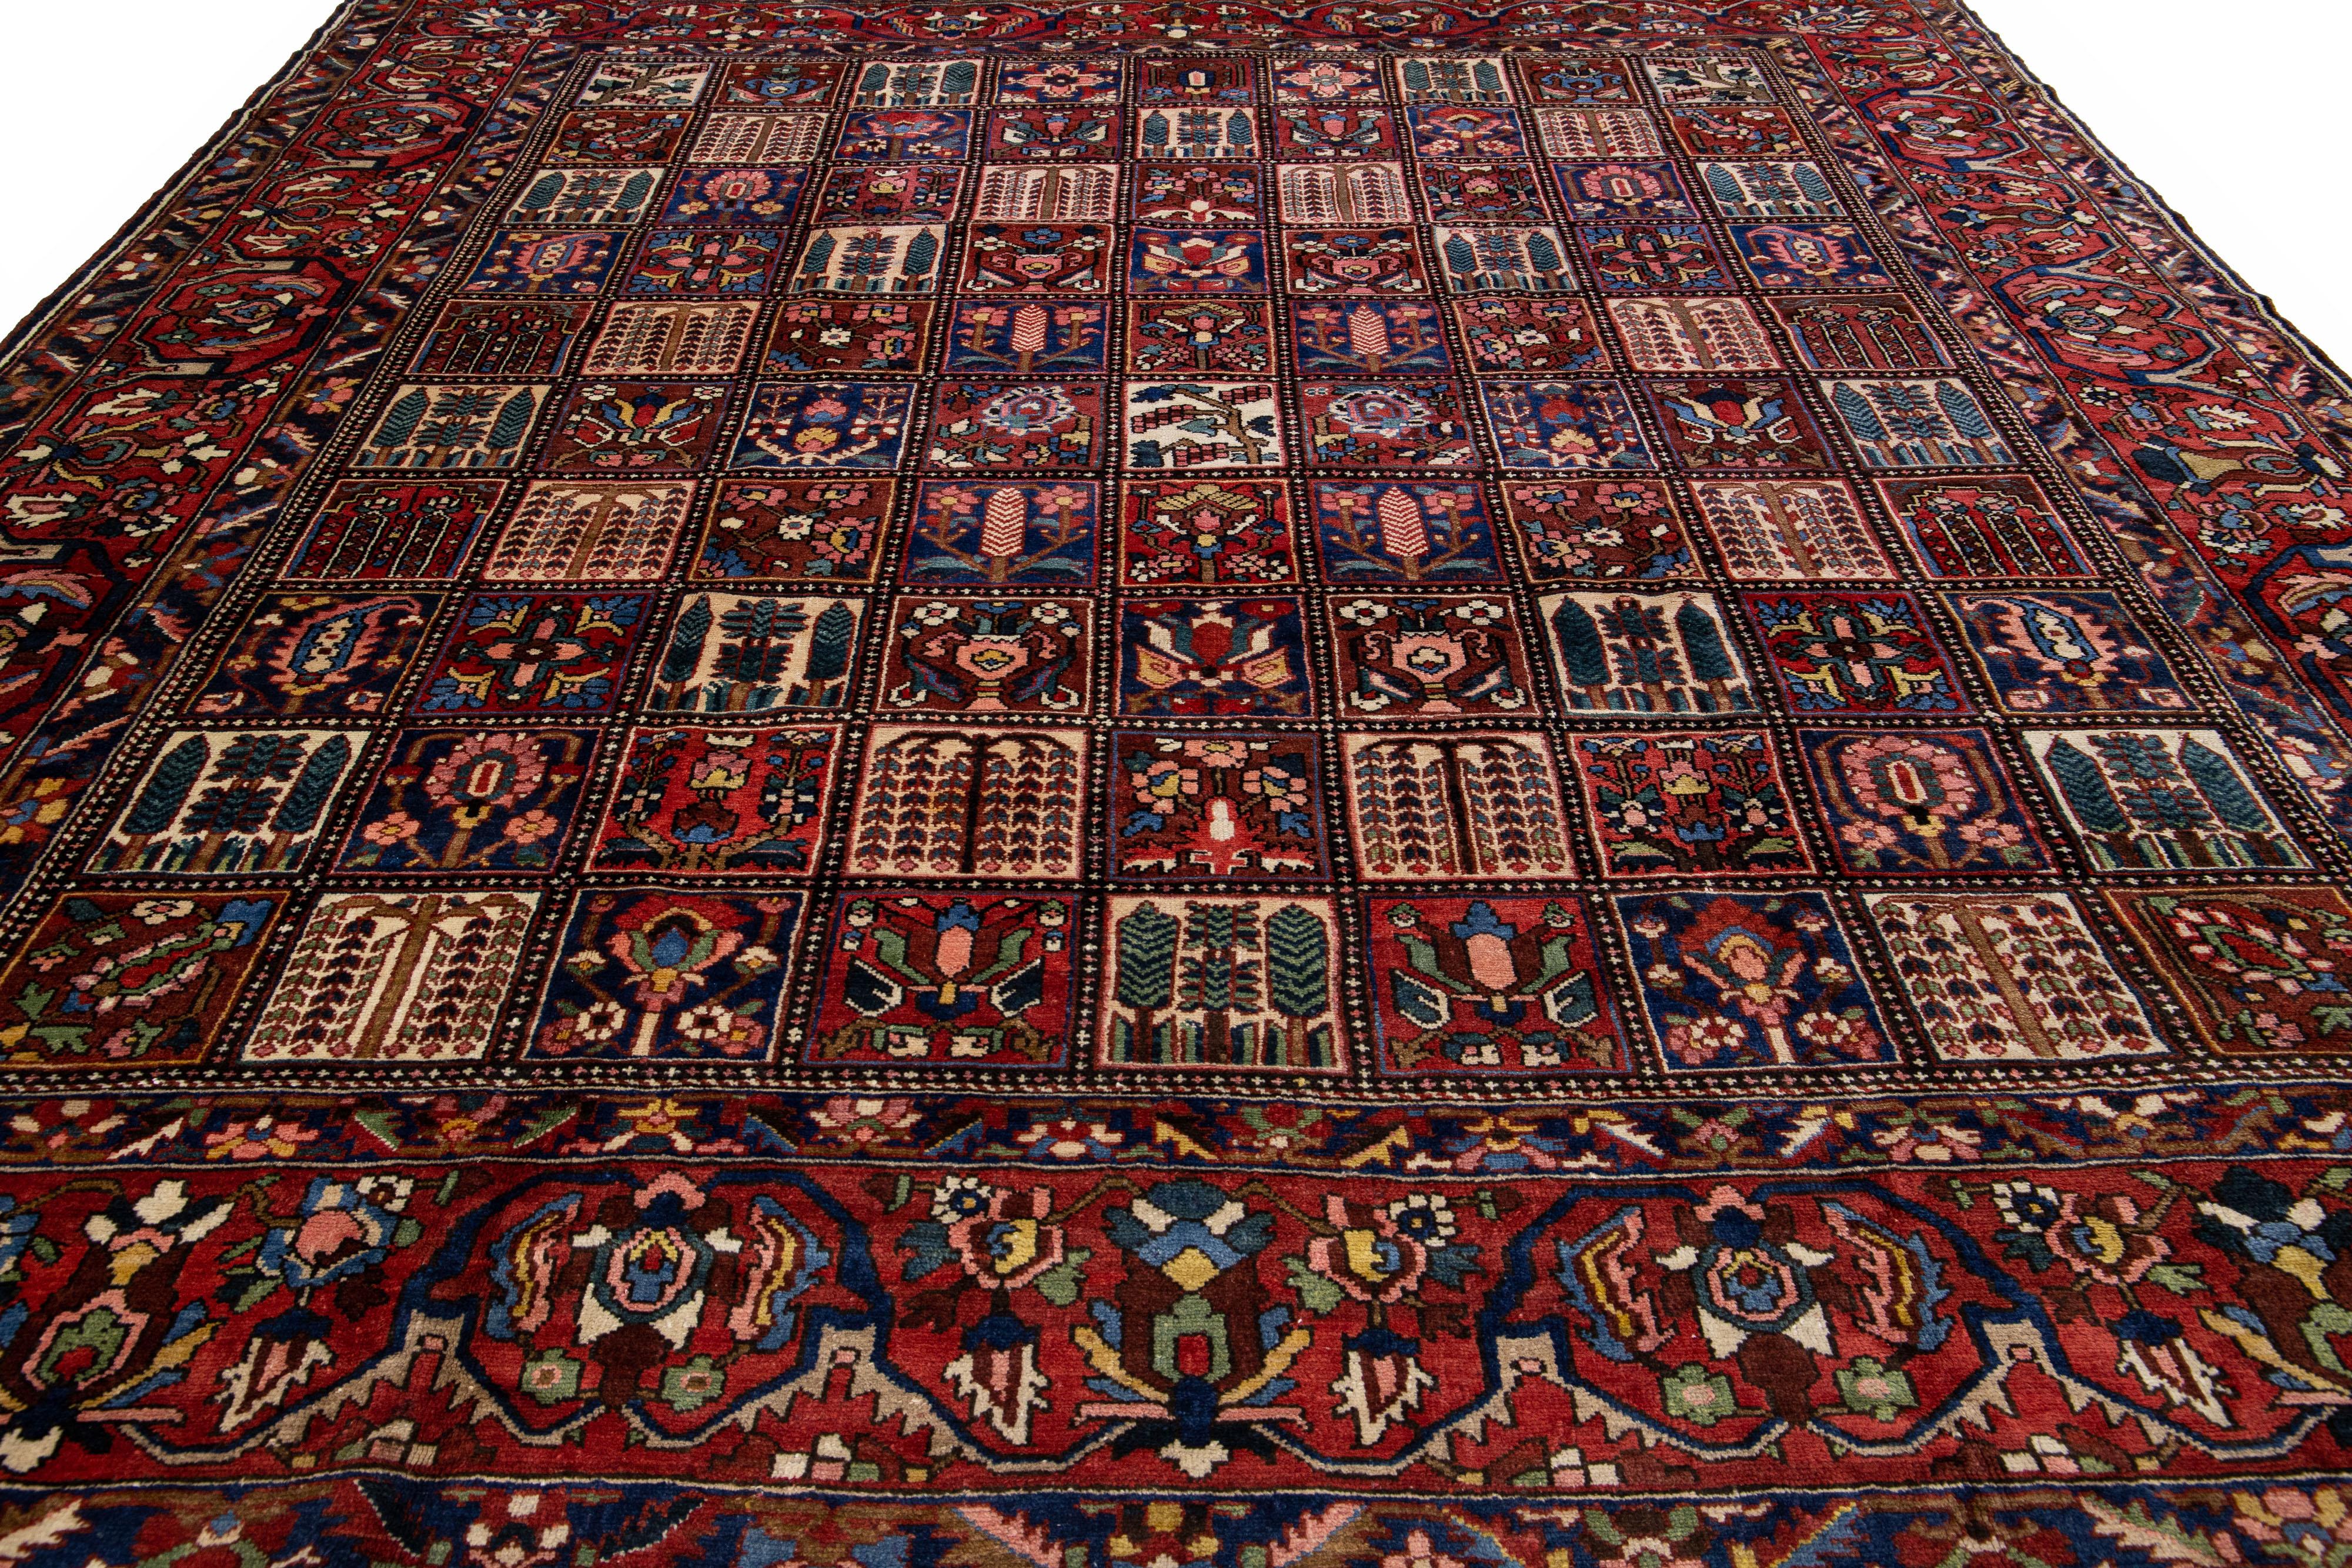 Beautiful Antique Bakhtiari hand-knotted wool rug with a red color field. This Persian piece has an all-over classic multicolor pattern design.

This rug measures 12'6